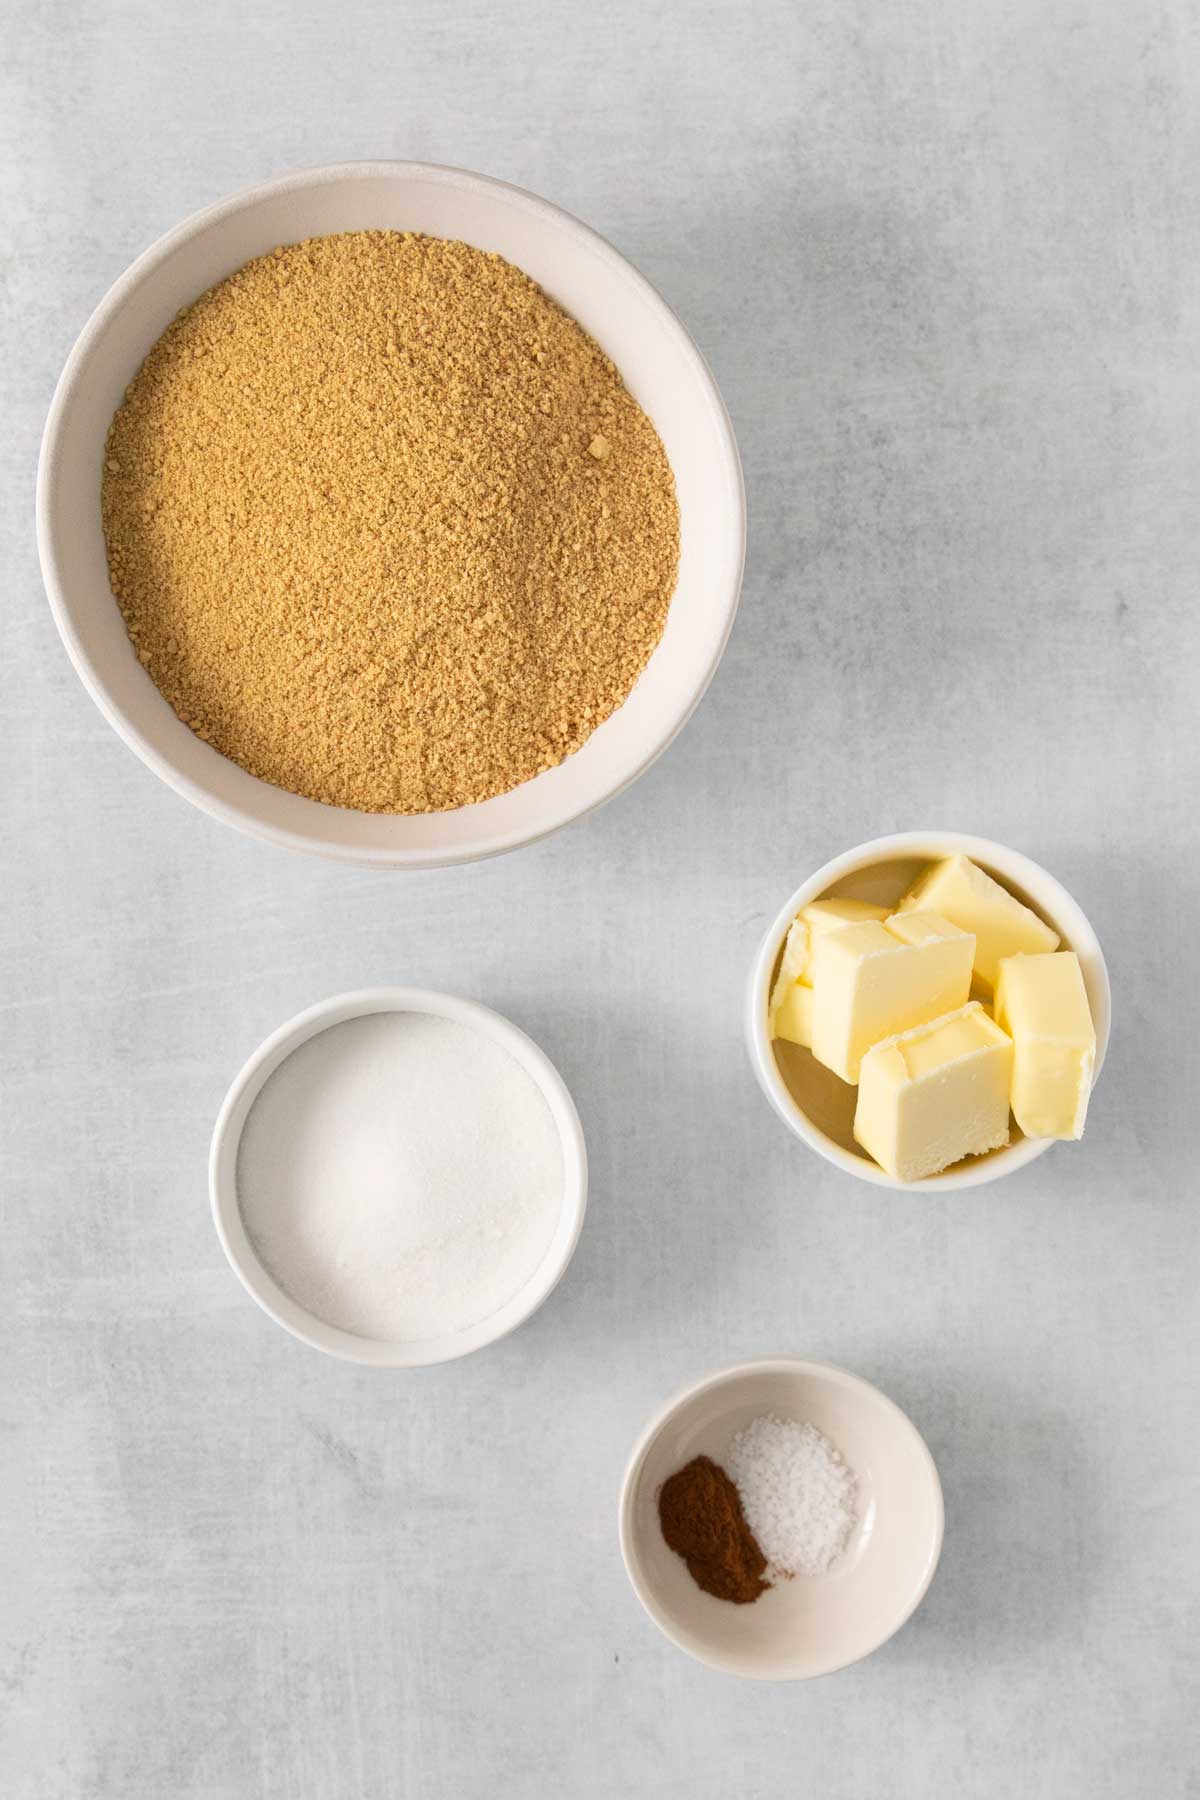 Ingredients for Banana Pudding Pie crust includes graham cracker, salt, butter, cinnamon and sugar